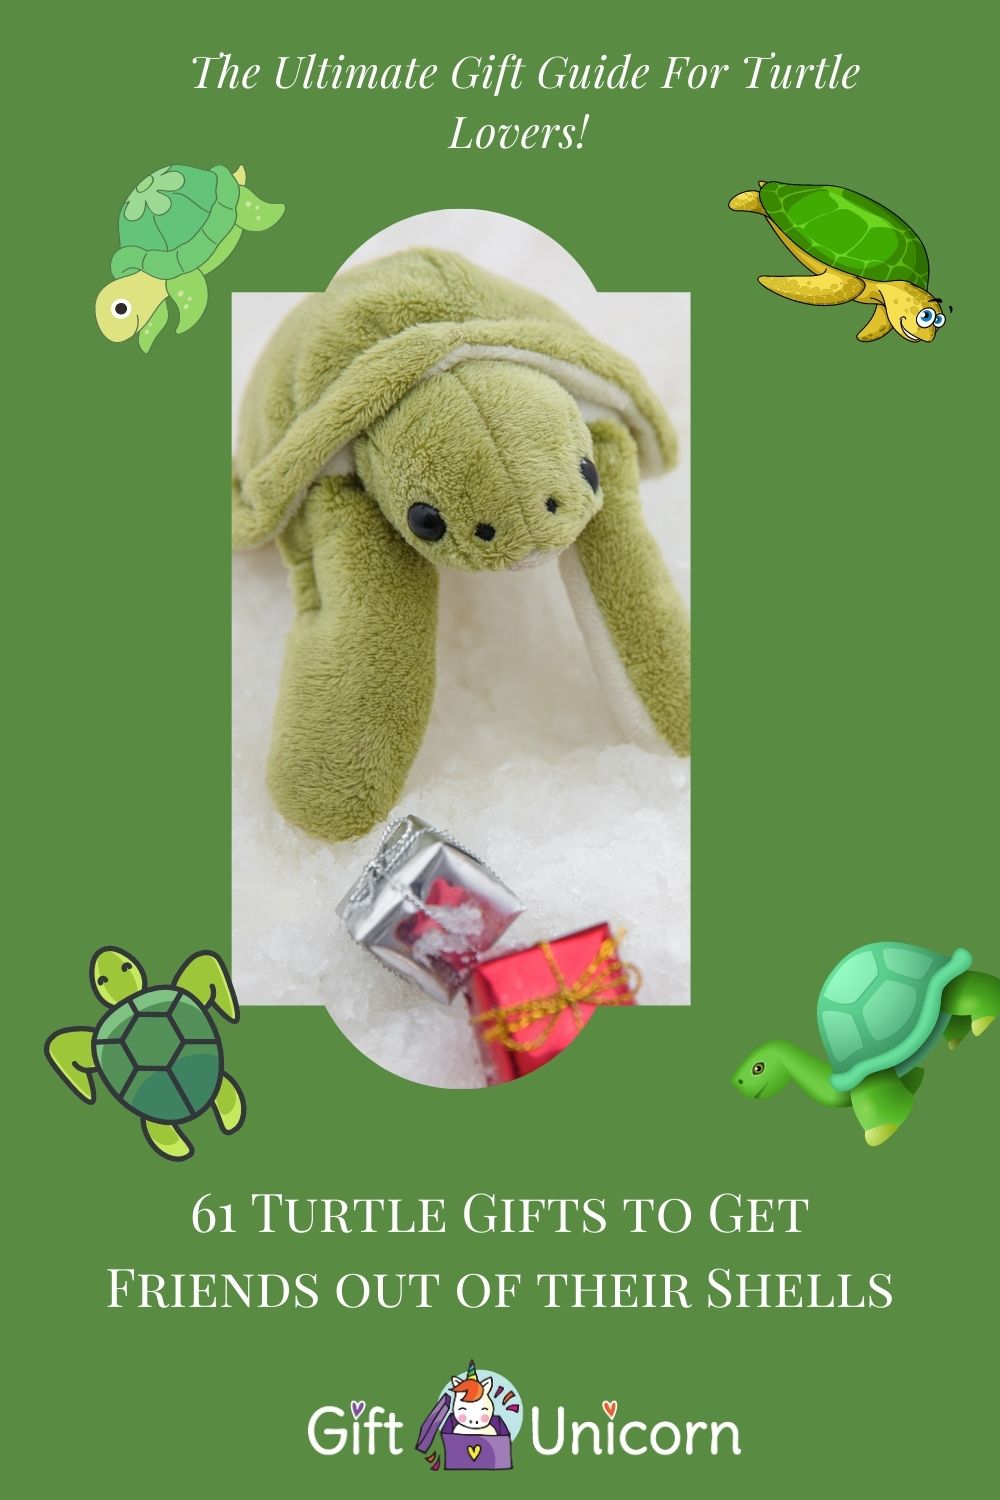 61 Turtle Gift Ideas (Unique and Collectible) - pinterest pin image